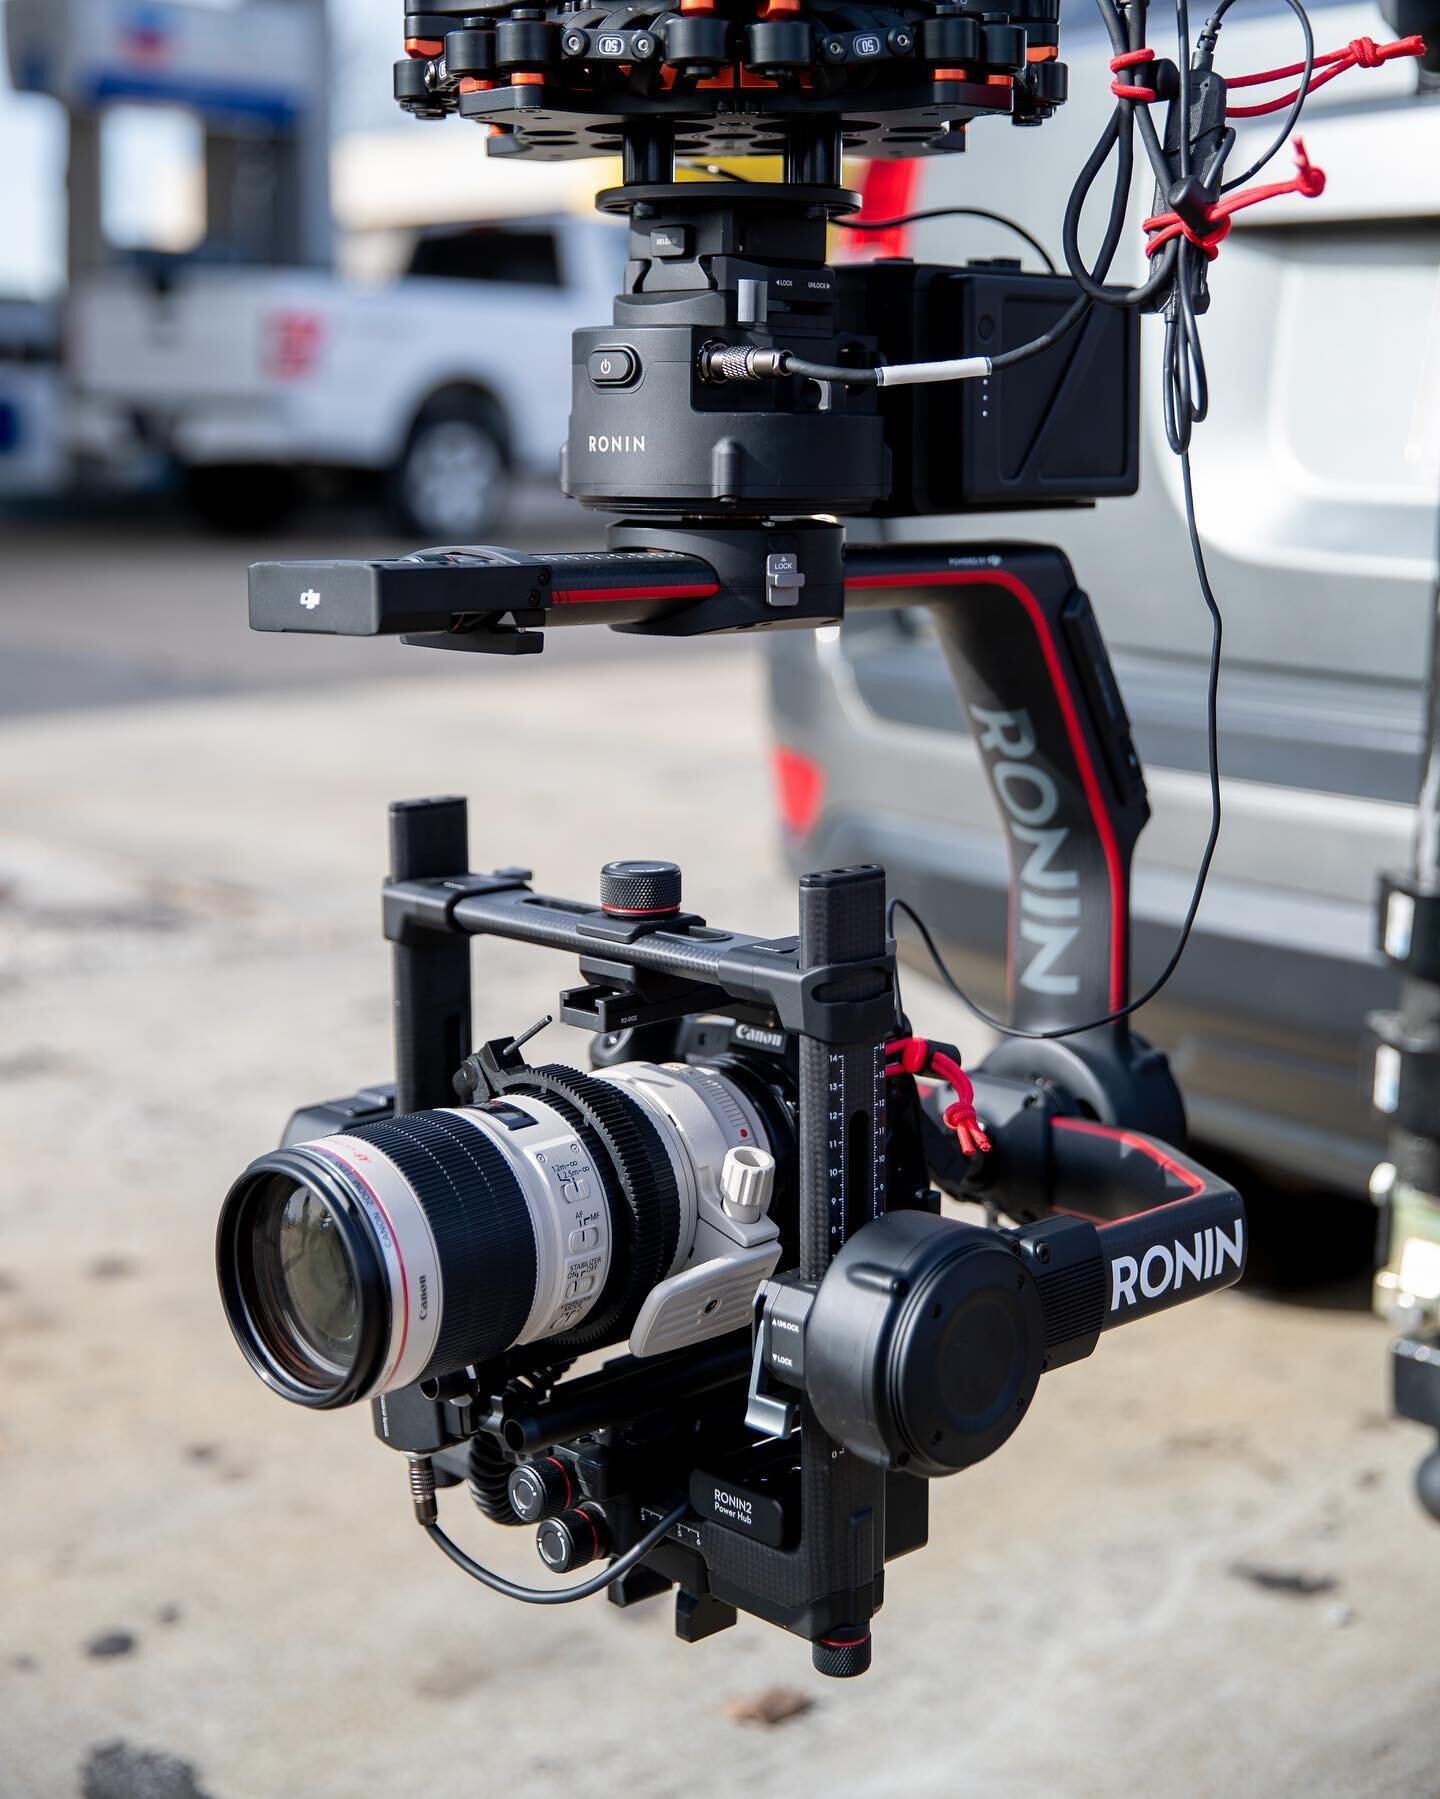 The compression of the 70-200 combined with stable camera car makes for some buttery video! 
#canon #70200mm #djironin2 #blackarm #flowcine #cinematography #chasecar #trackingvehicle #cameracar #canon #eosr